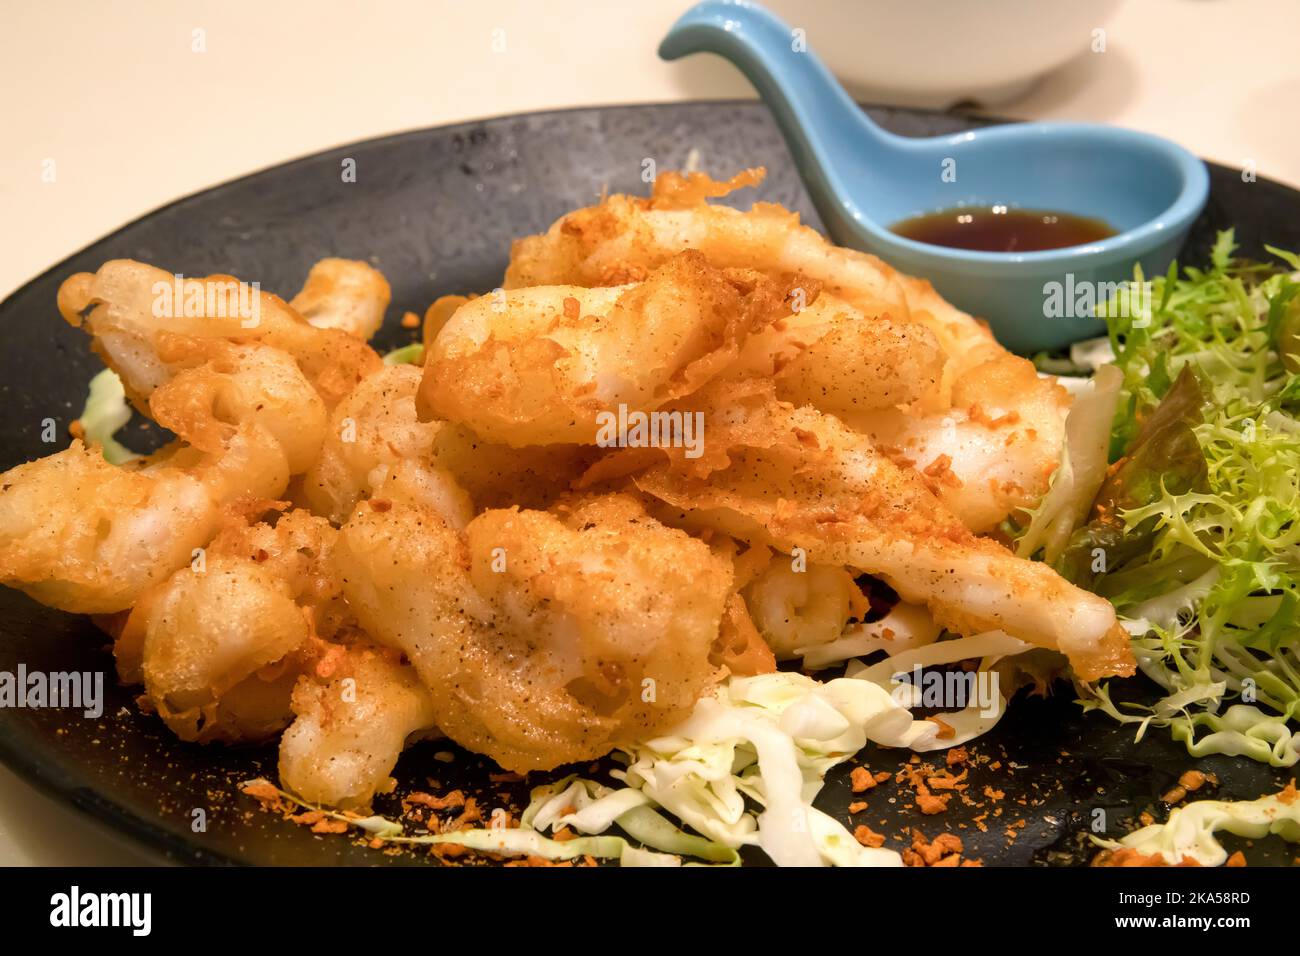 Chinese fried squid in batter, Hong Kong, China. Stock Photo